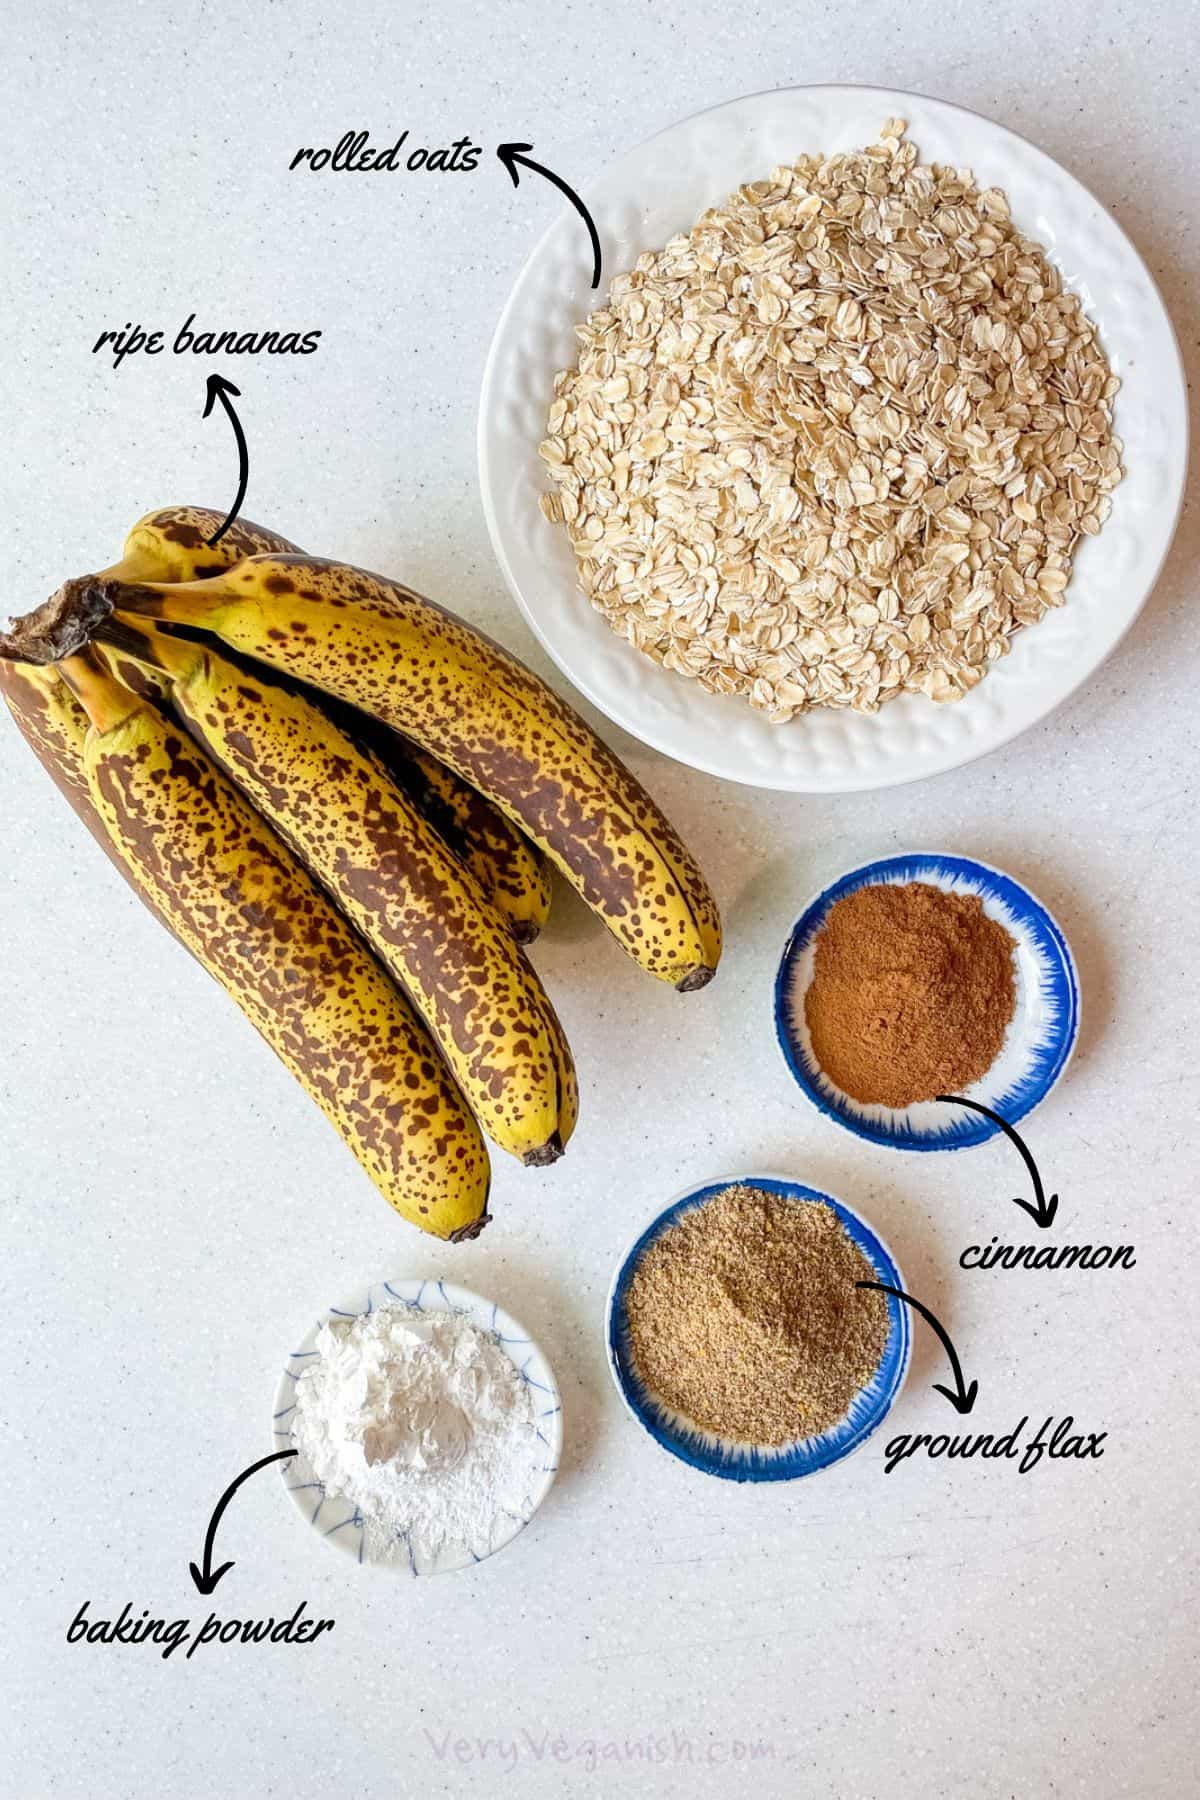 Ingredients for vegan banana oat bars: rolled oats, a whole bunch of ripe bananas, cinnamon, ground flax and baking powder